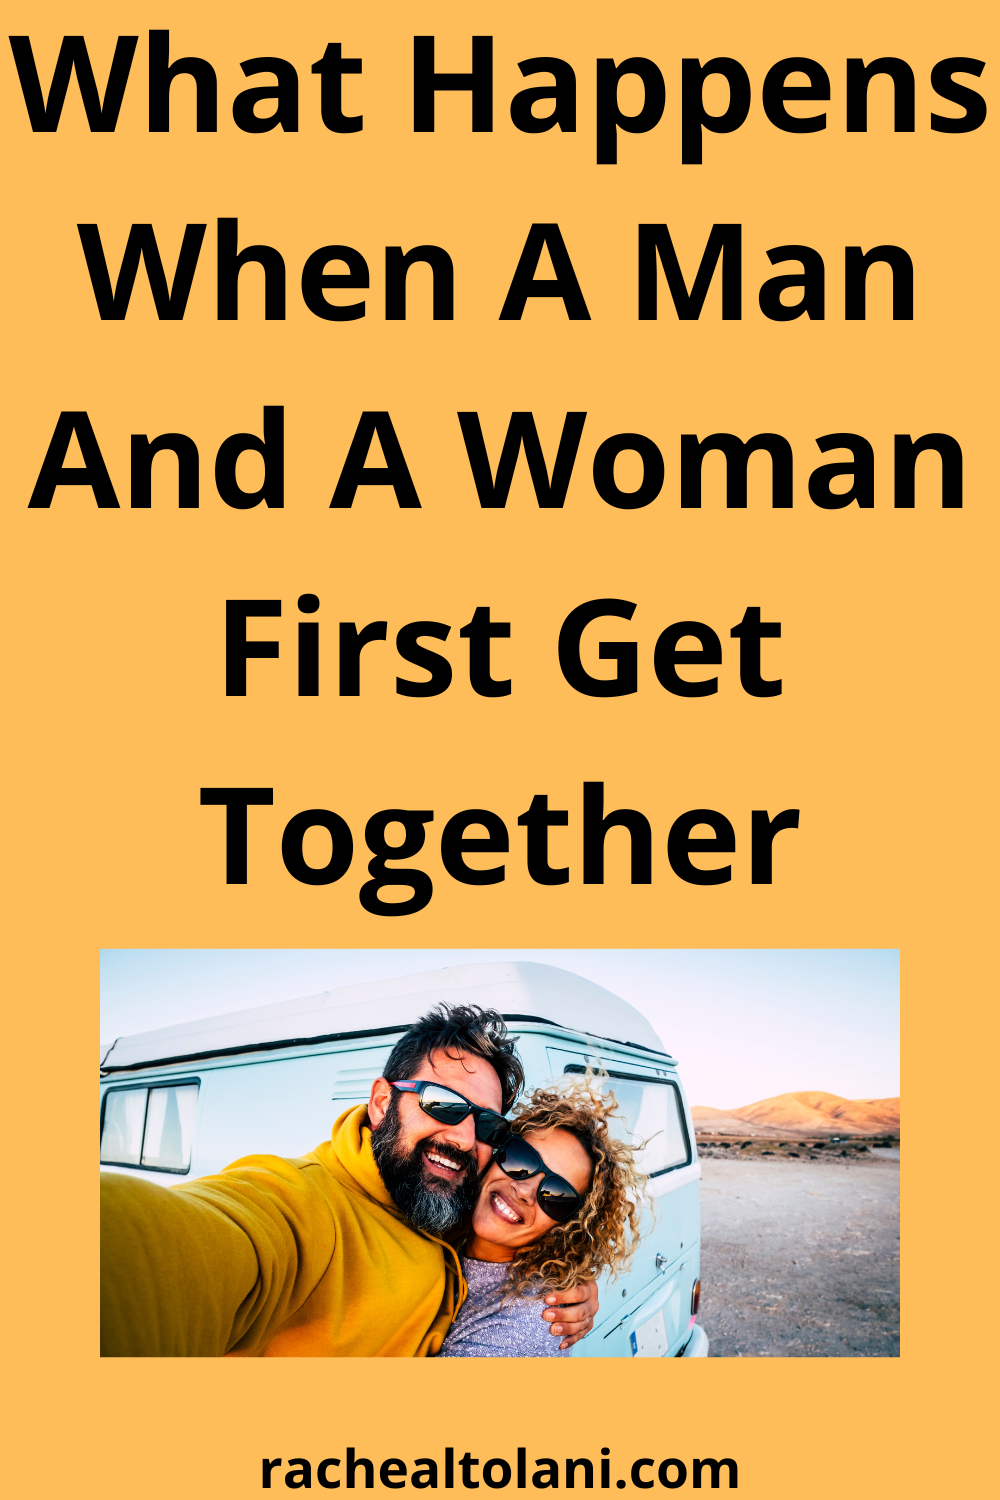 What Happens When A Man And A Woman First Get Together